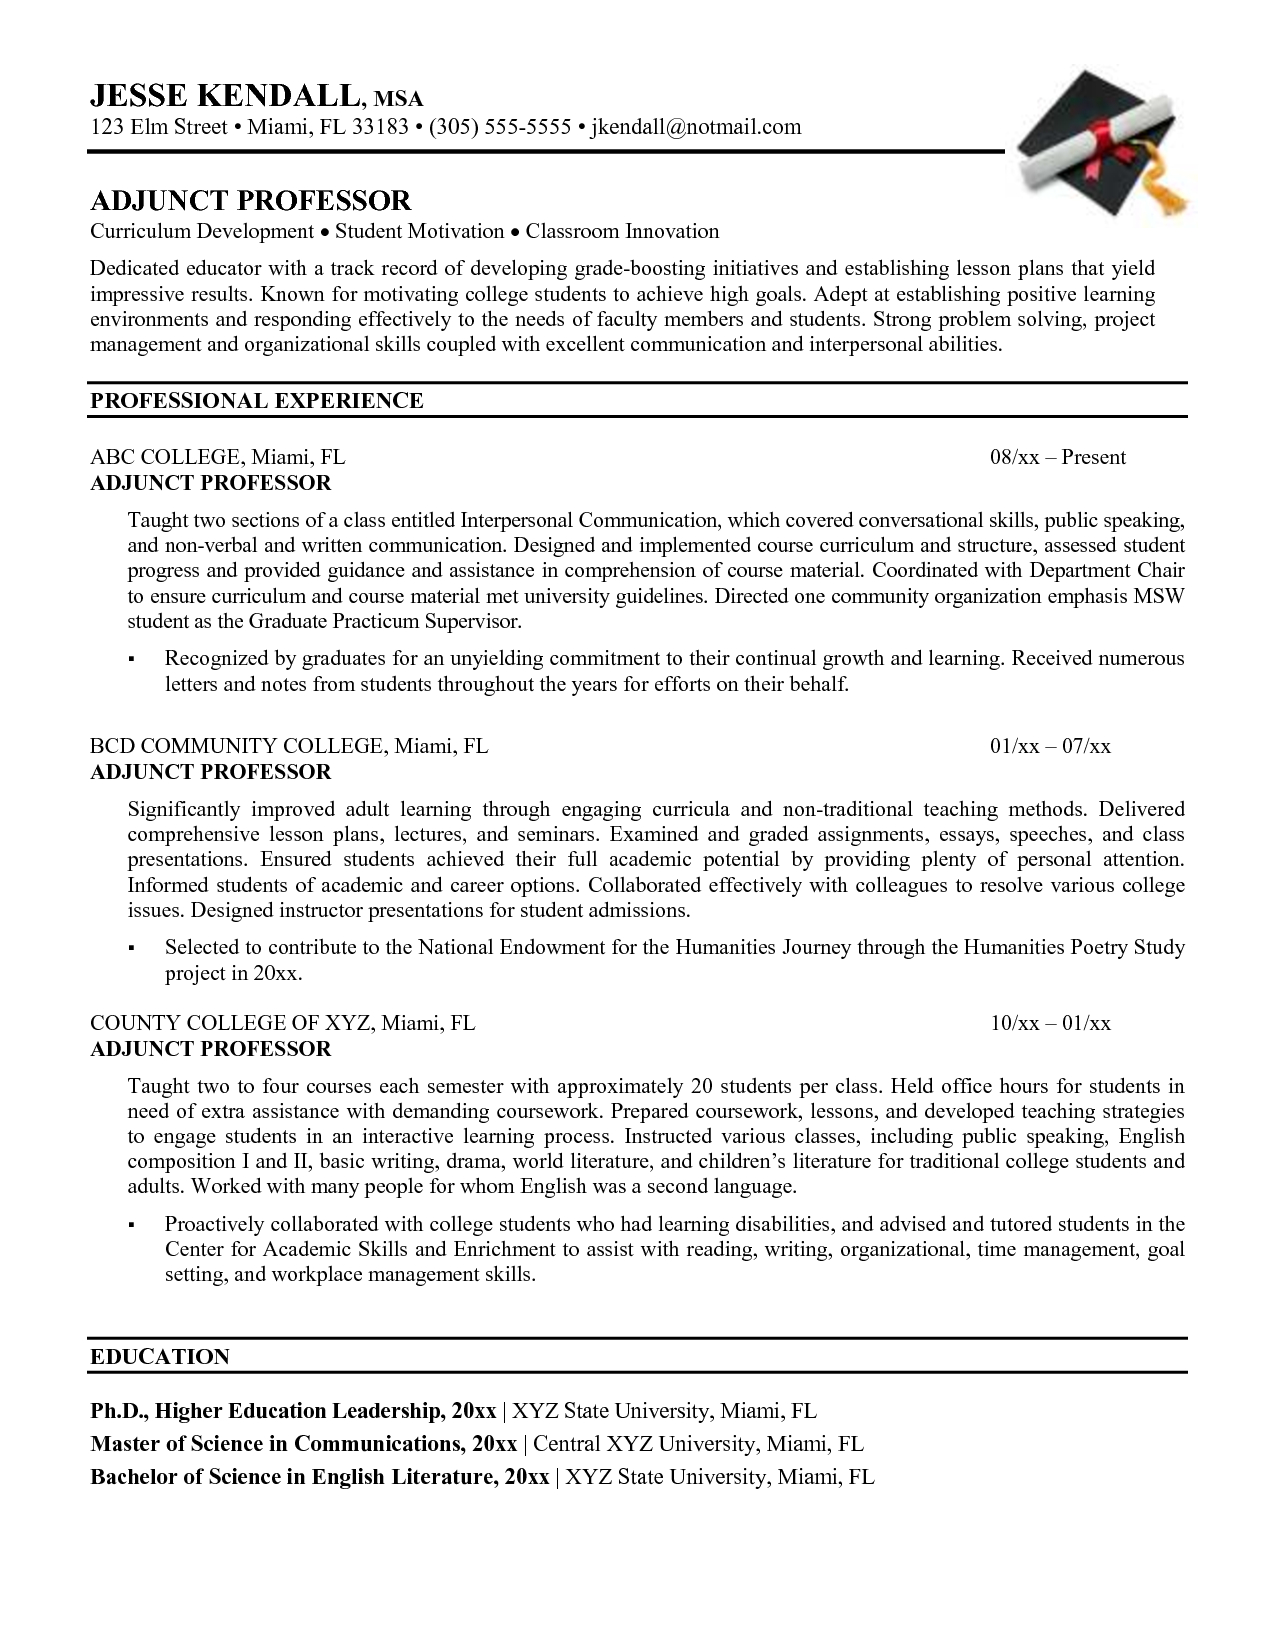 Sample Resume For Faculty Position Engineering Adjunct within size 1275 X 1650